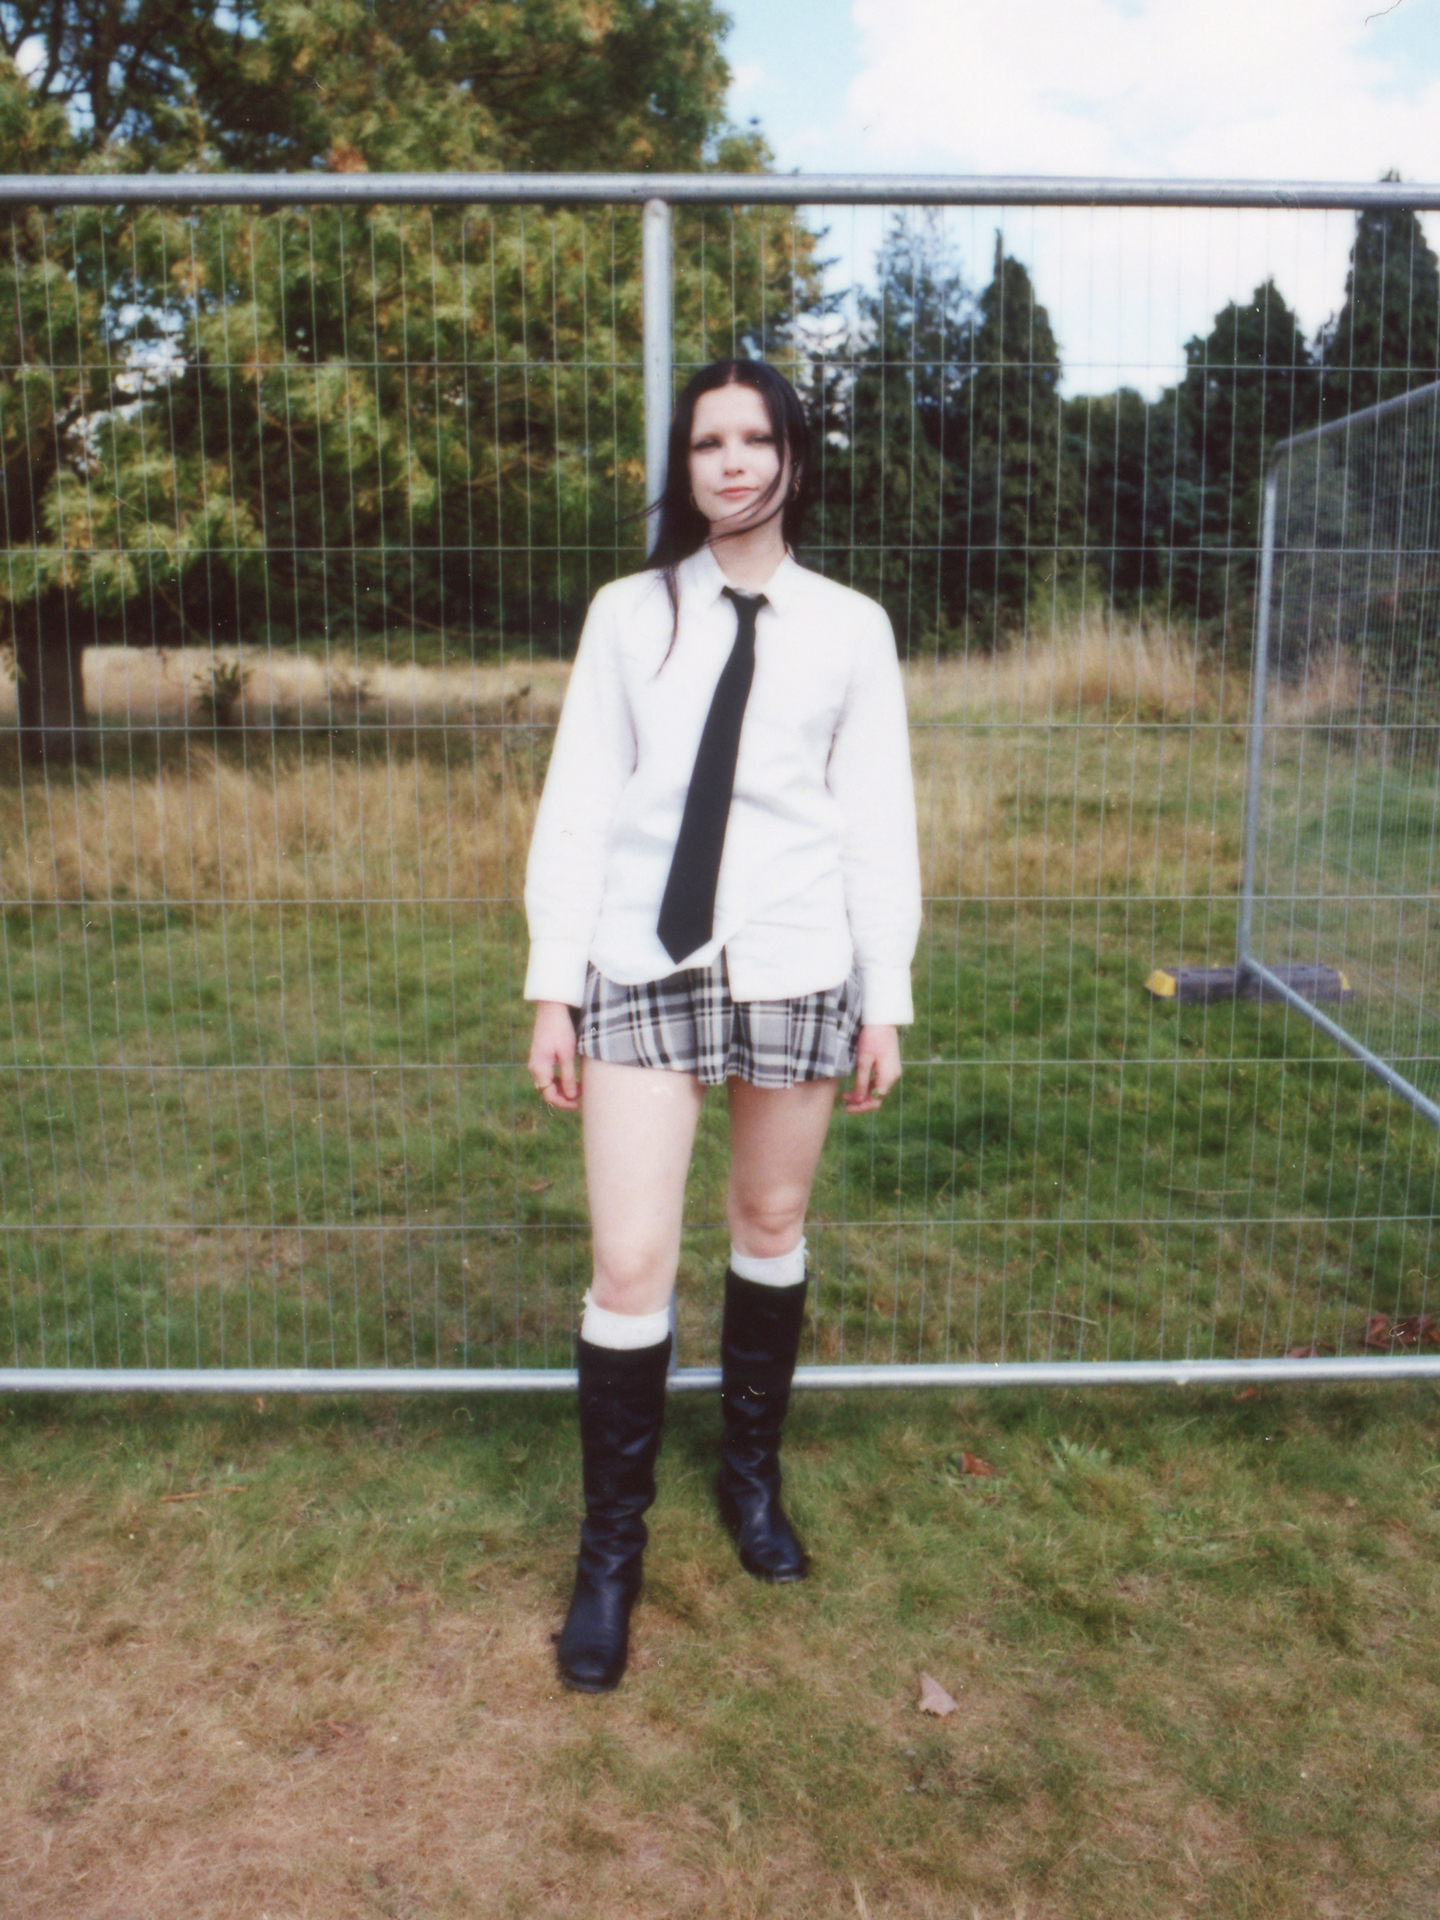 a festival-goer wearing knee-high boots with a short checked skirt, shirt and black tie stands in front of a metal gate photographed by Jody Evans